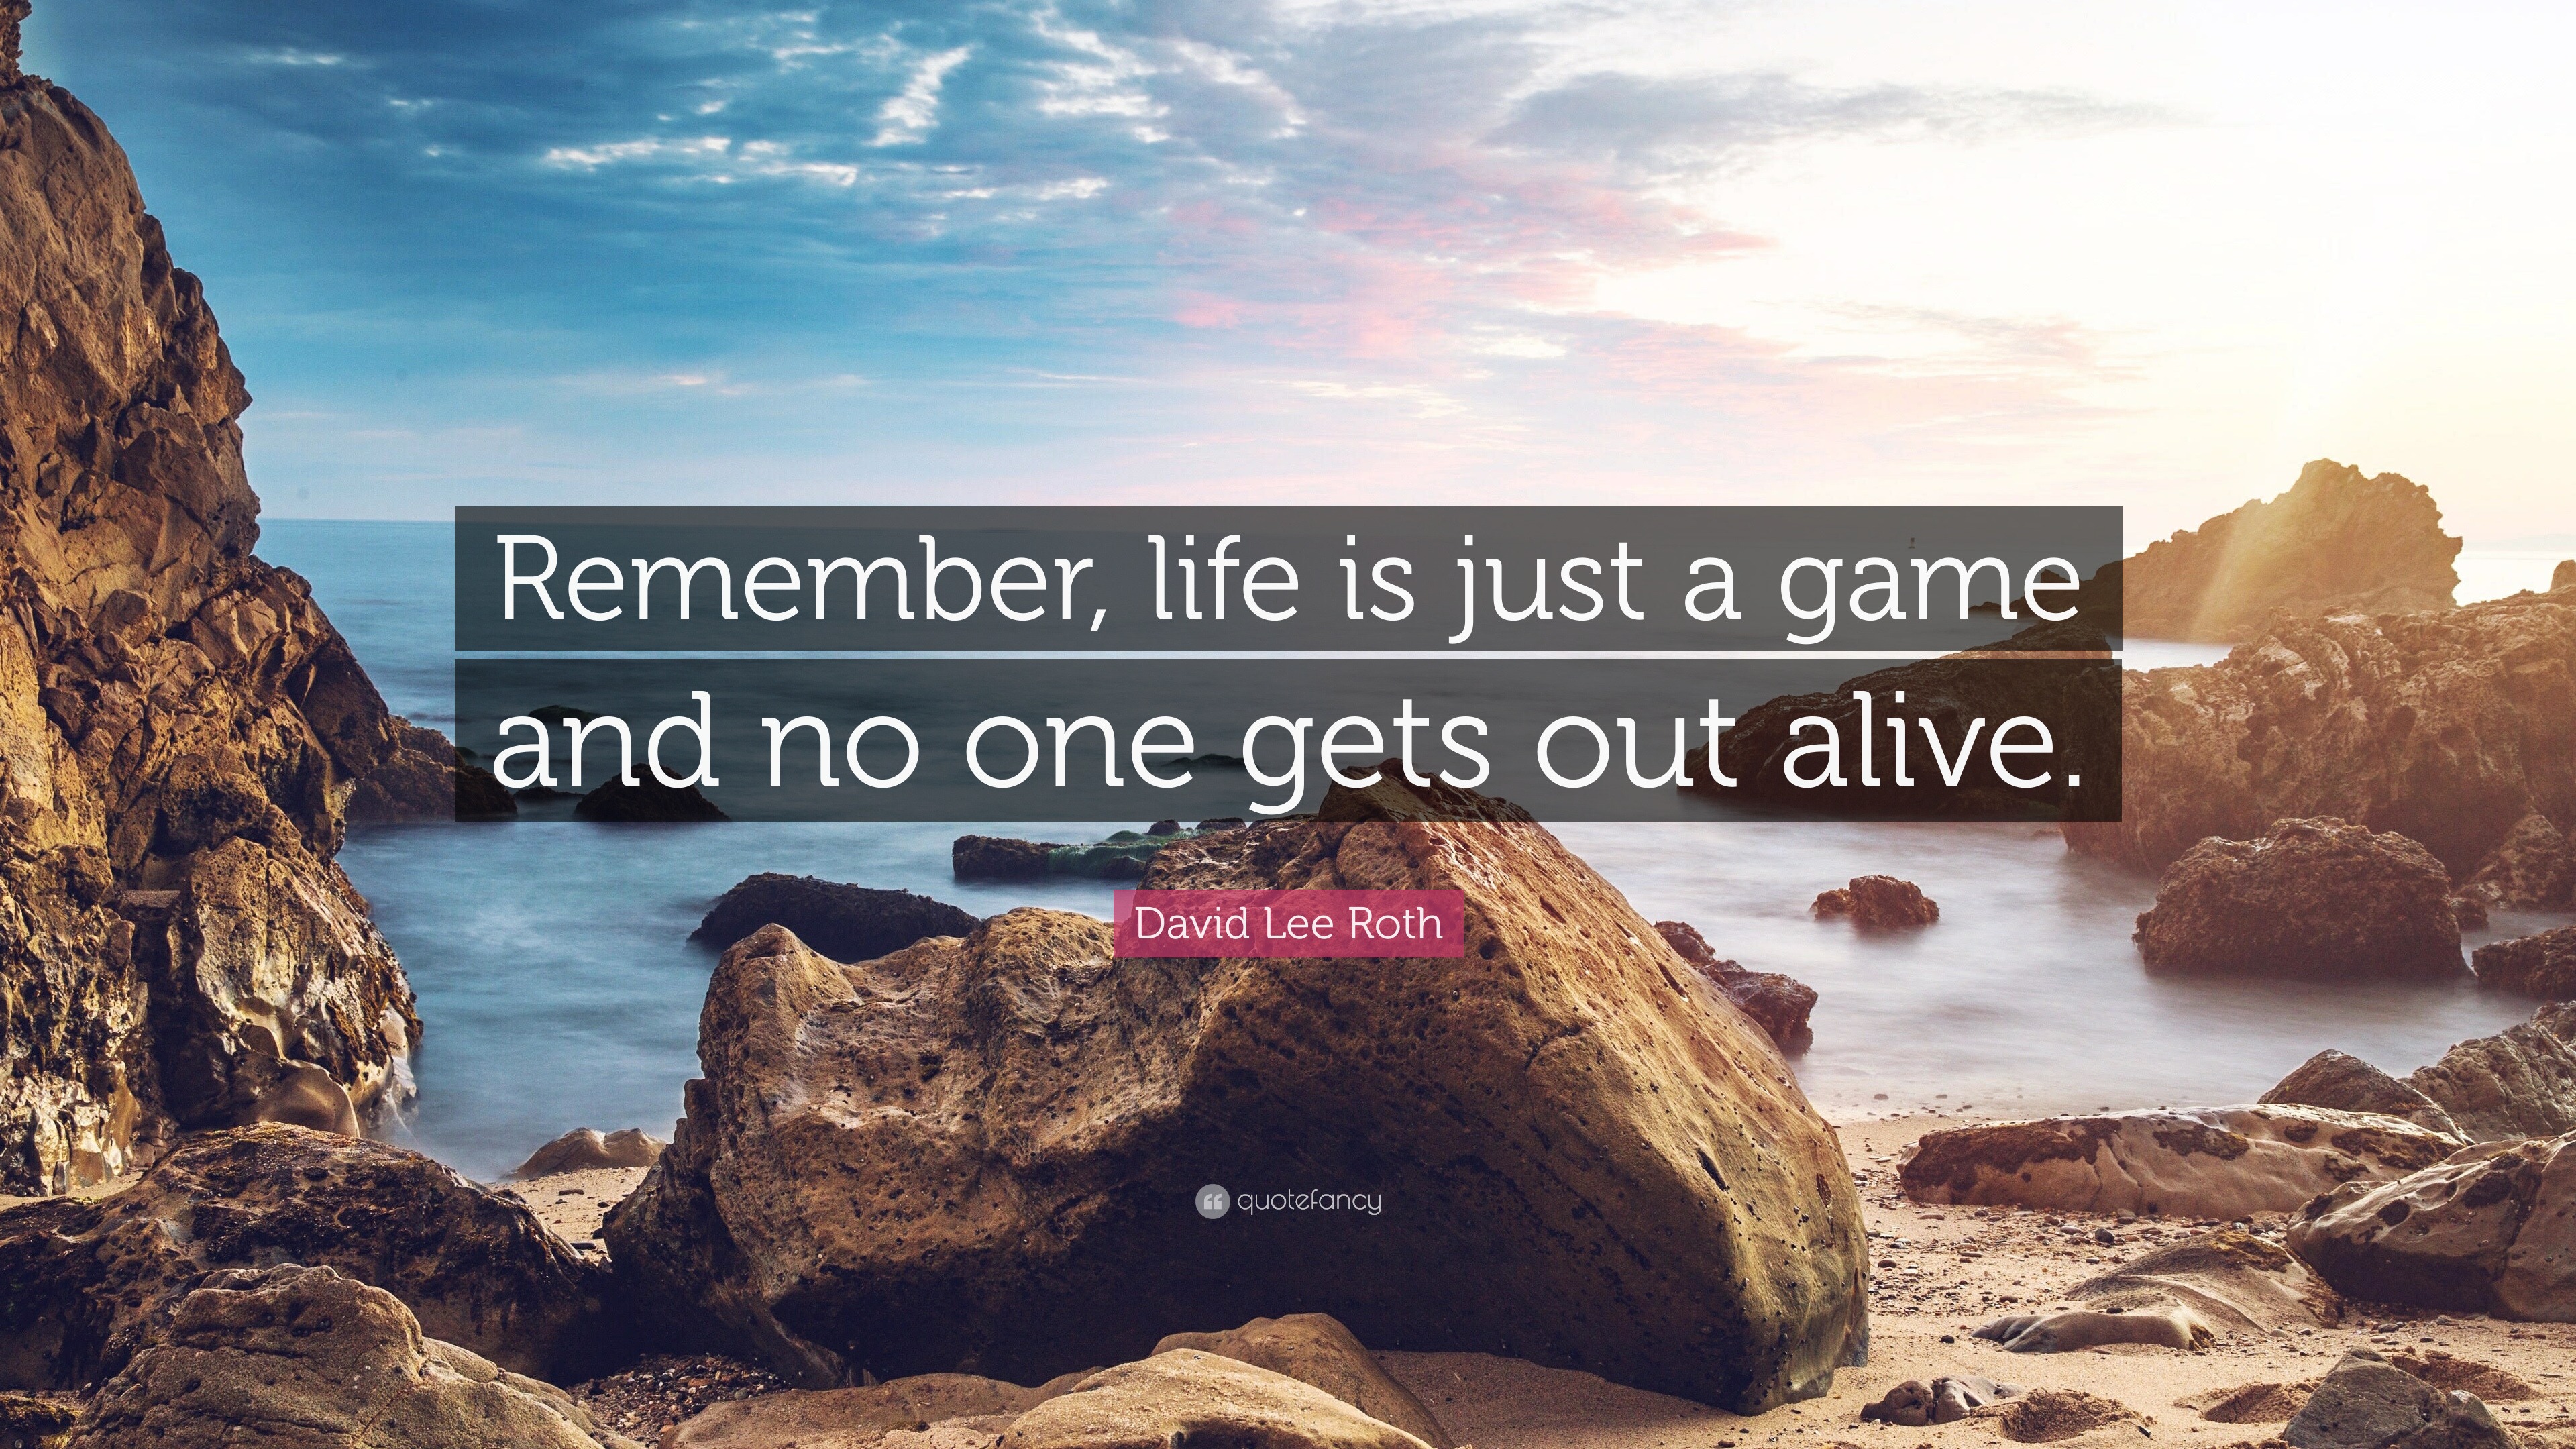 David Lee Roth quote: Remember, life is just a game and no one gets